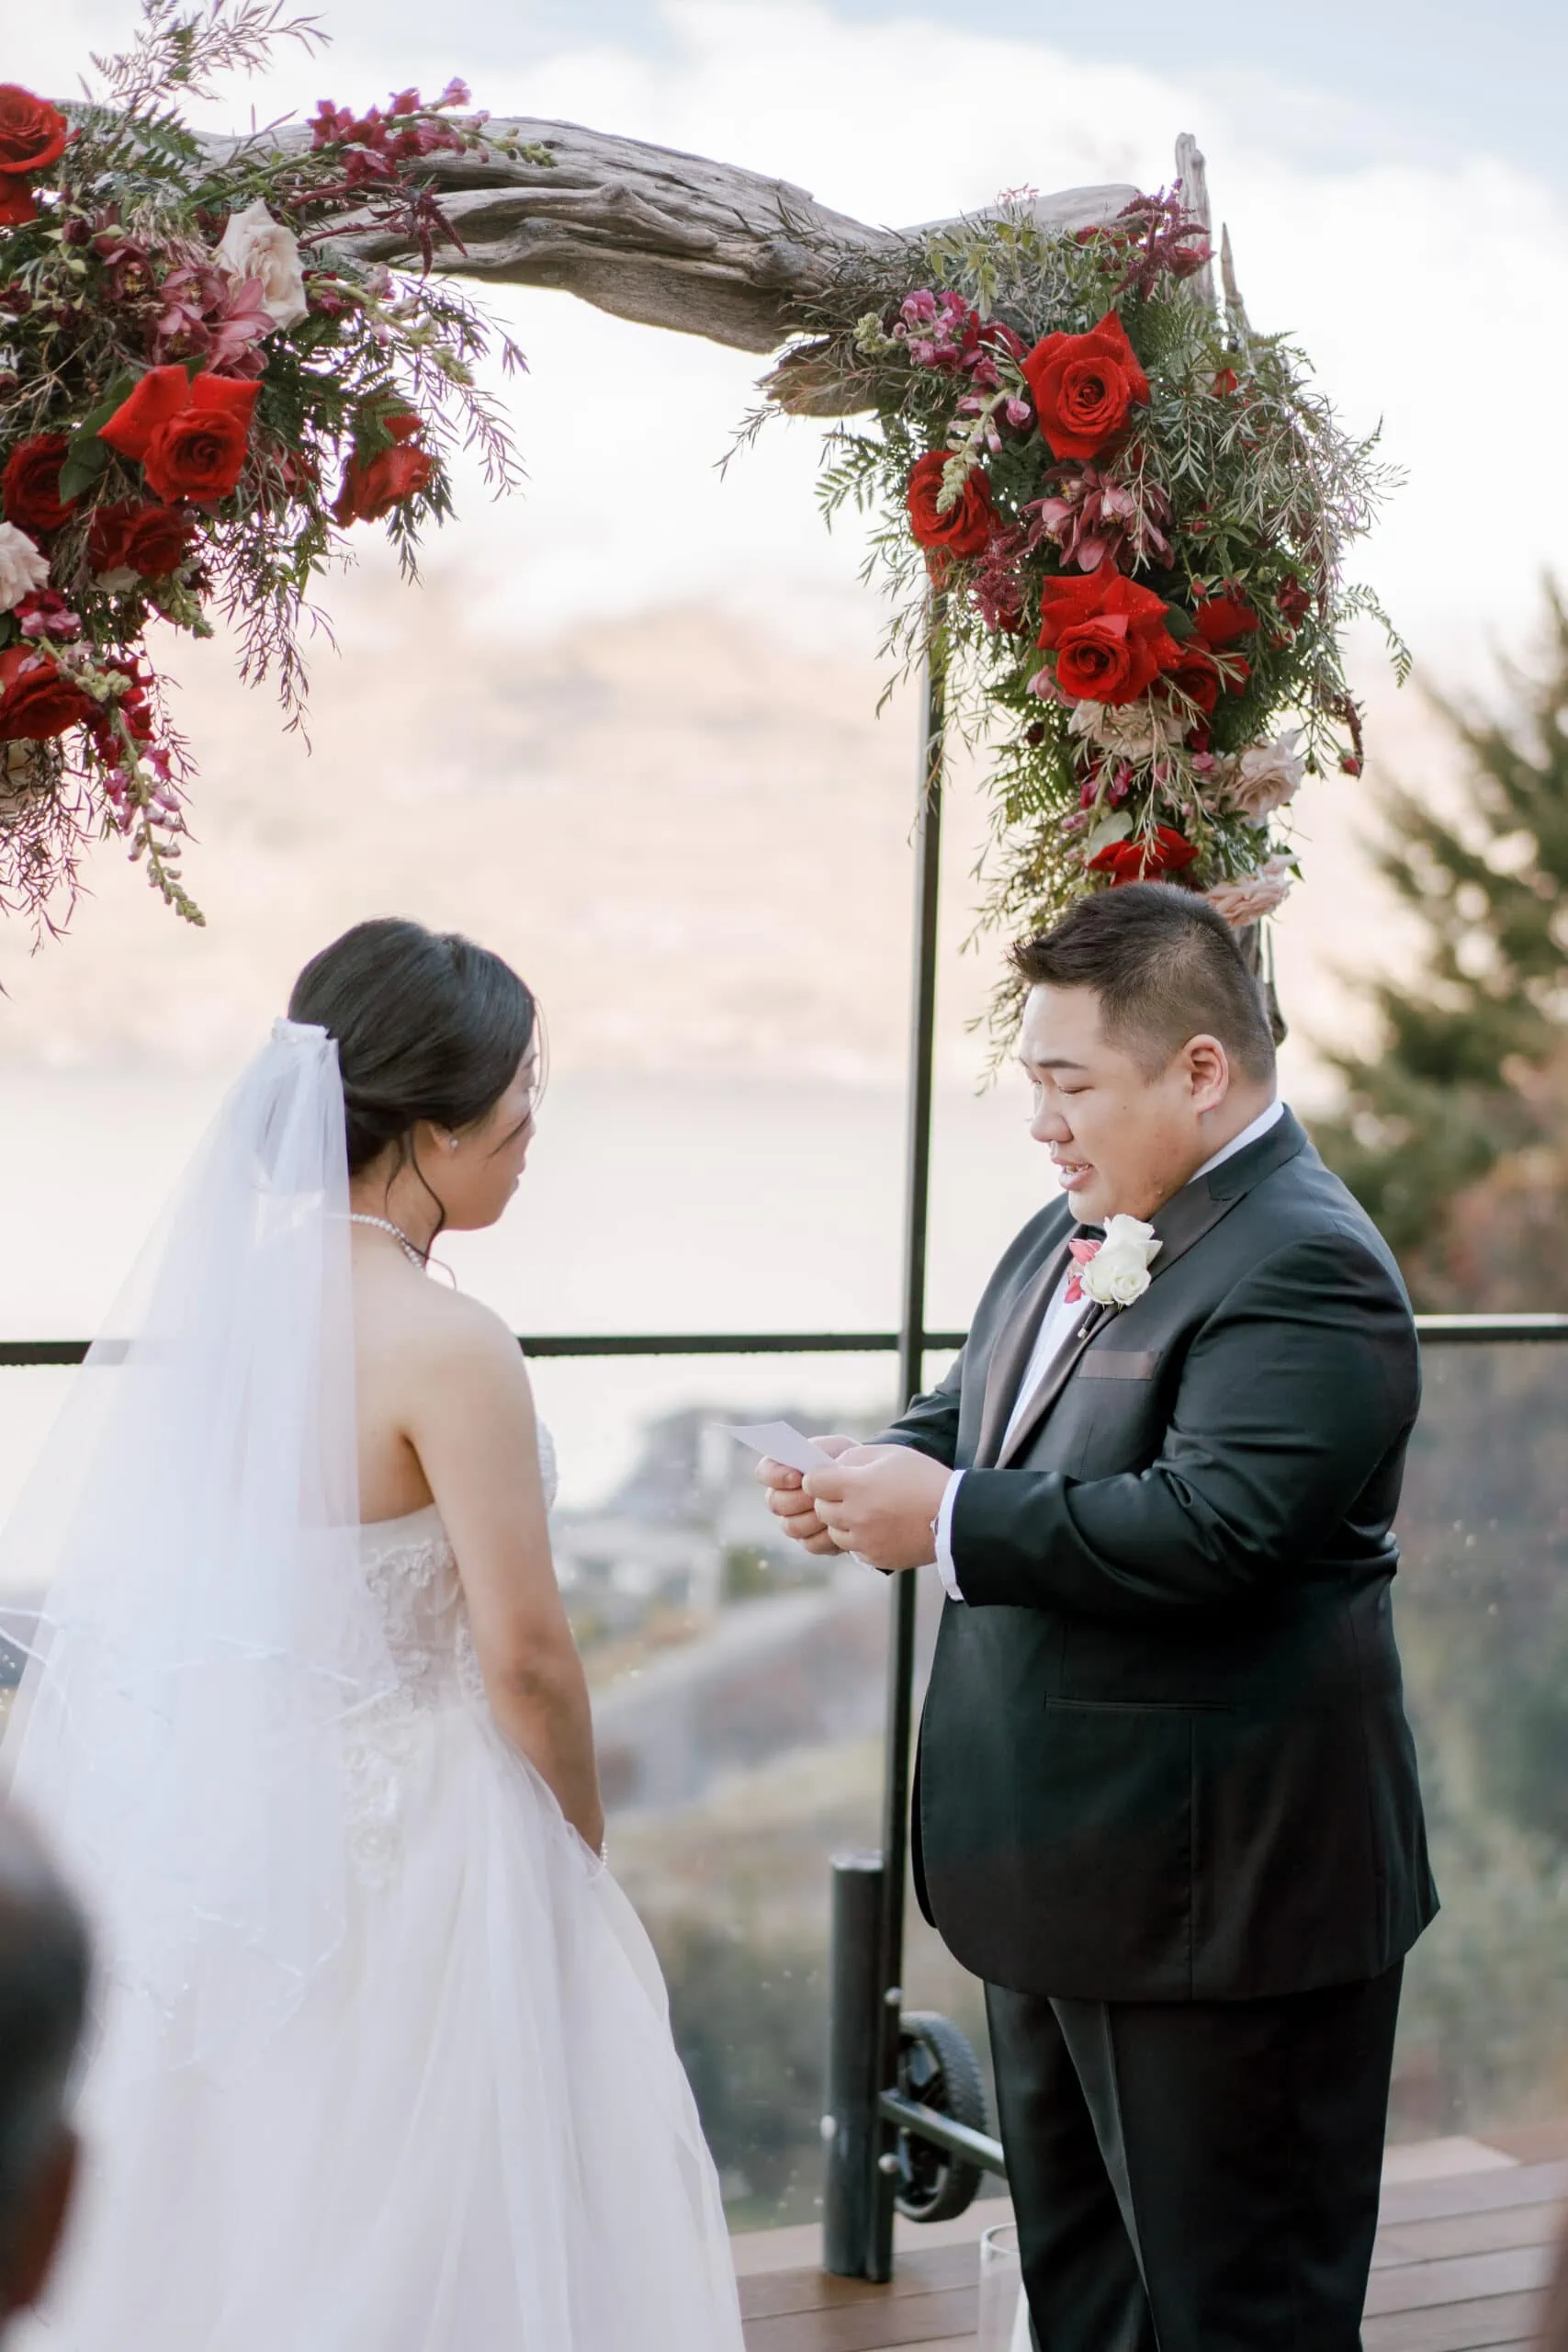 Queenstown New Zealand Elopement Wedding Photographer - Lam and Wendy exchange rings at their Kamana Lakehouse wedding ceremony.